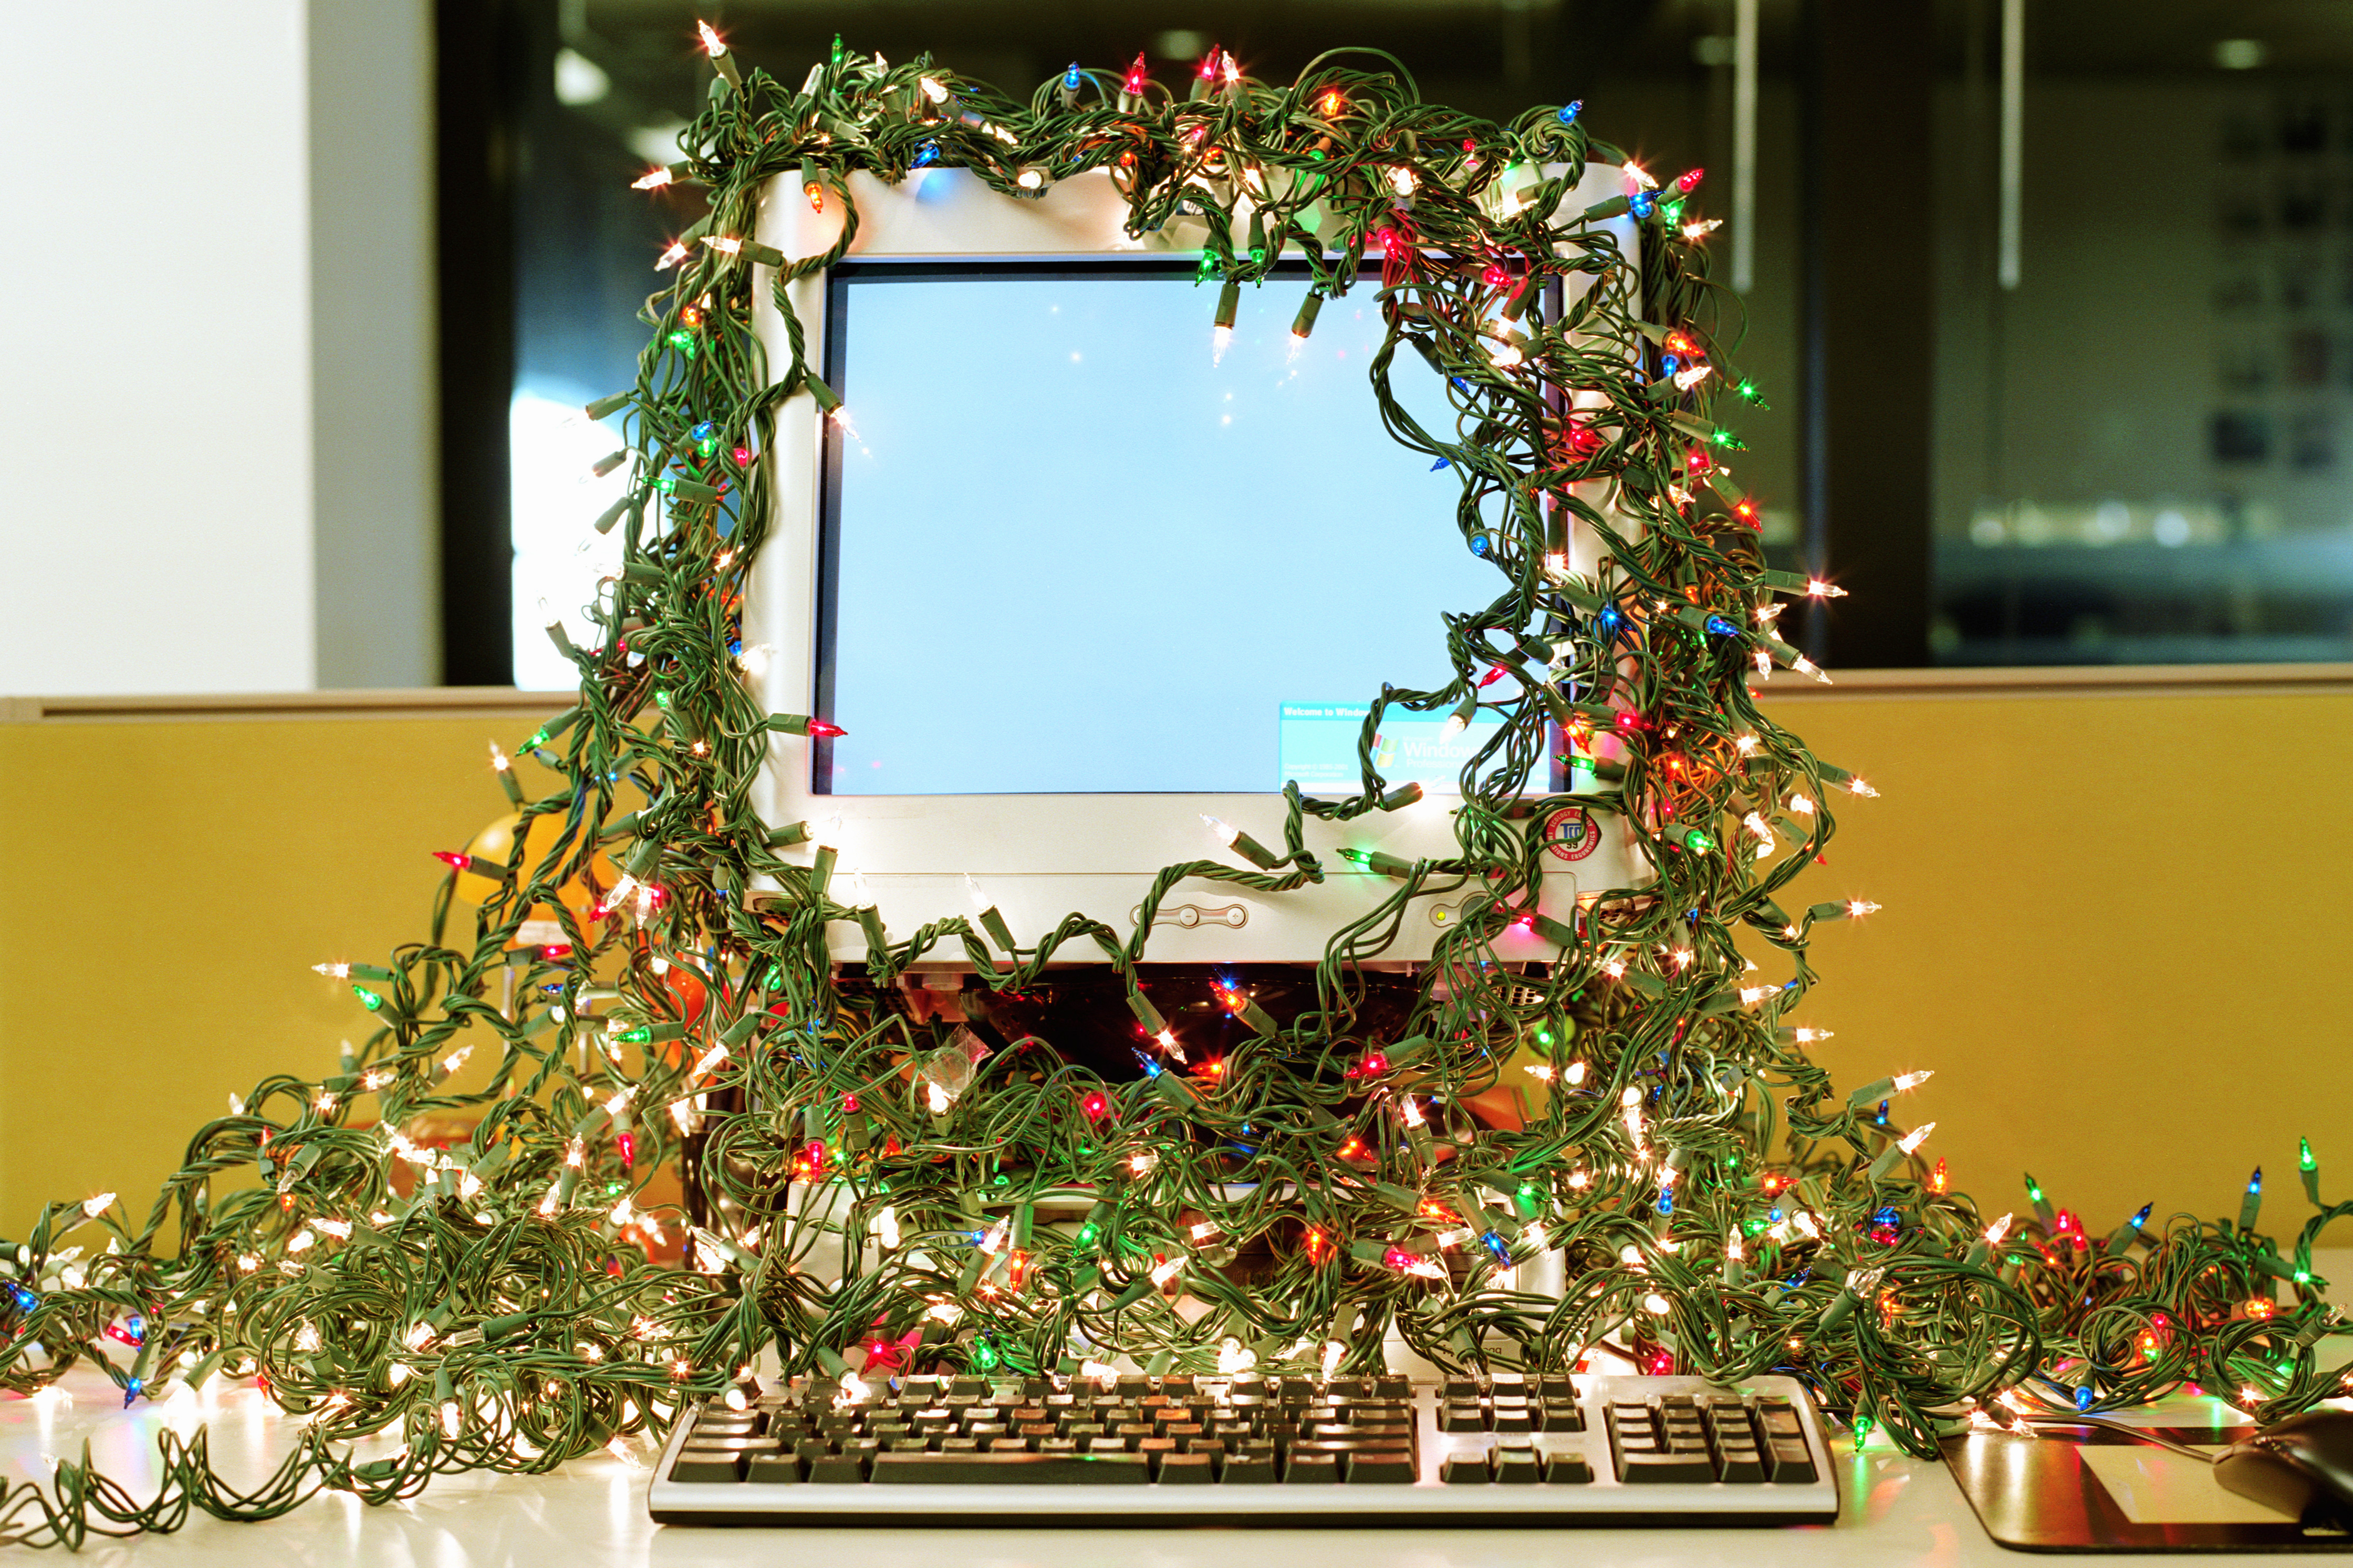 A computer in an office cubicle, covered in strings of holiday twinkle lights.